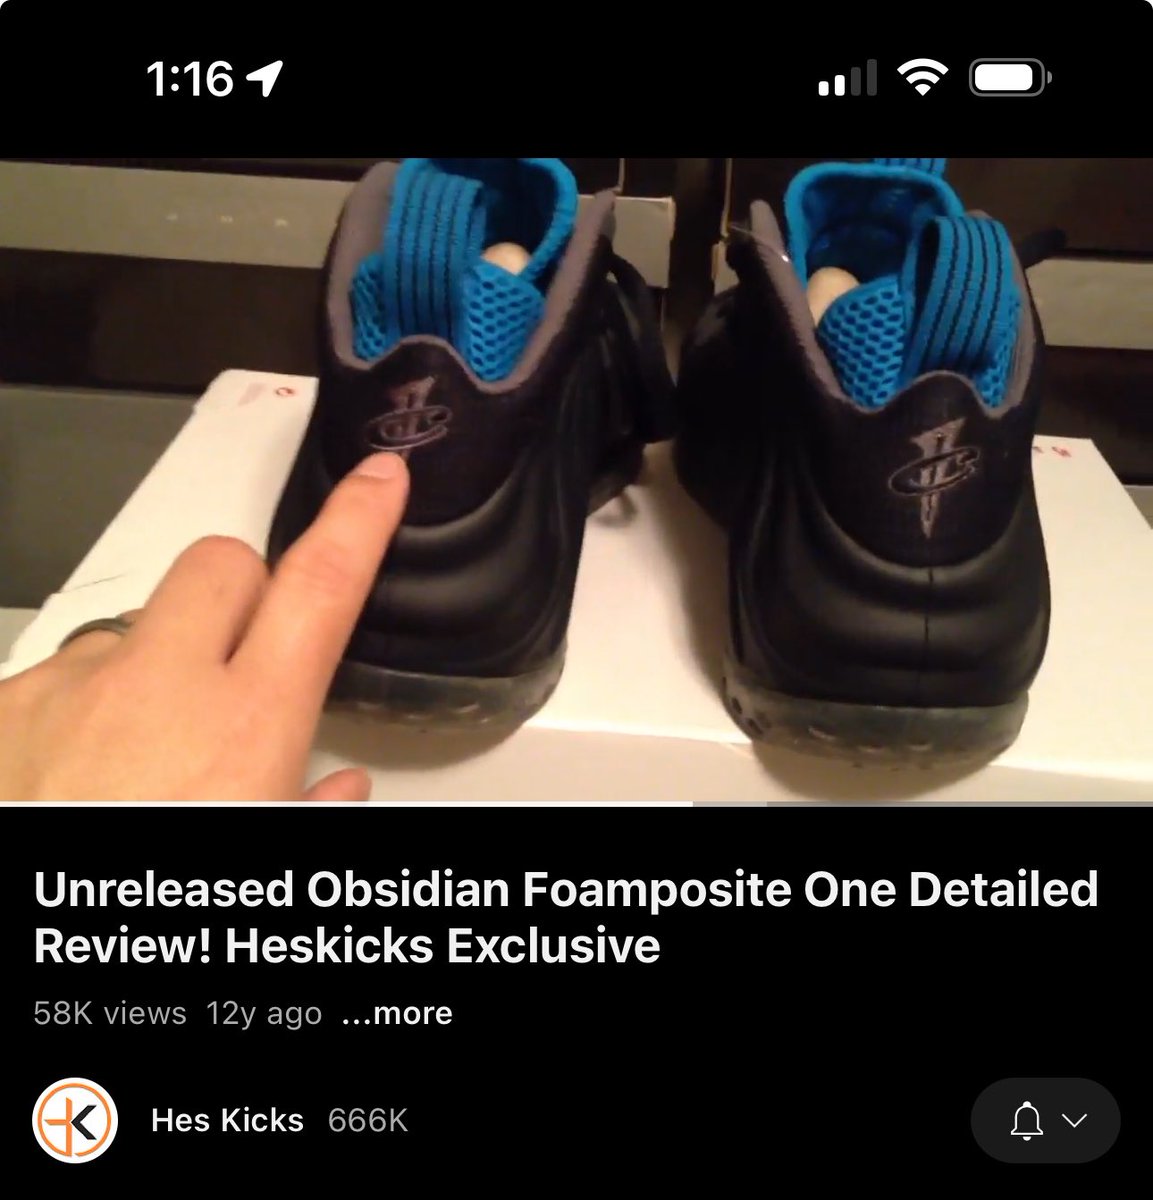 Hey @Heskicks went into a Foamposites rabbit hole and came across this vid, do you still have these????